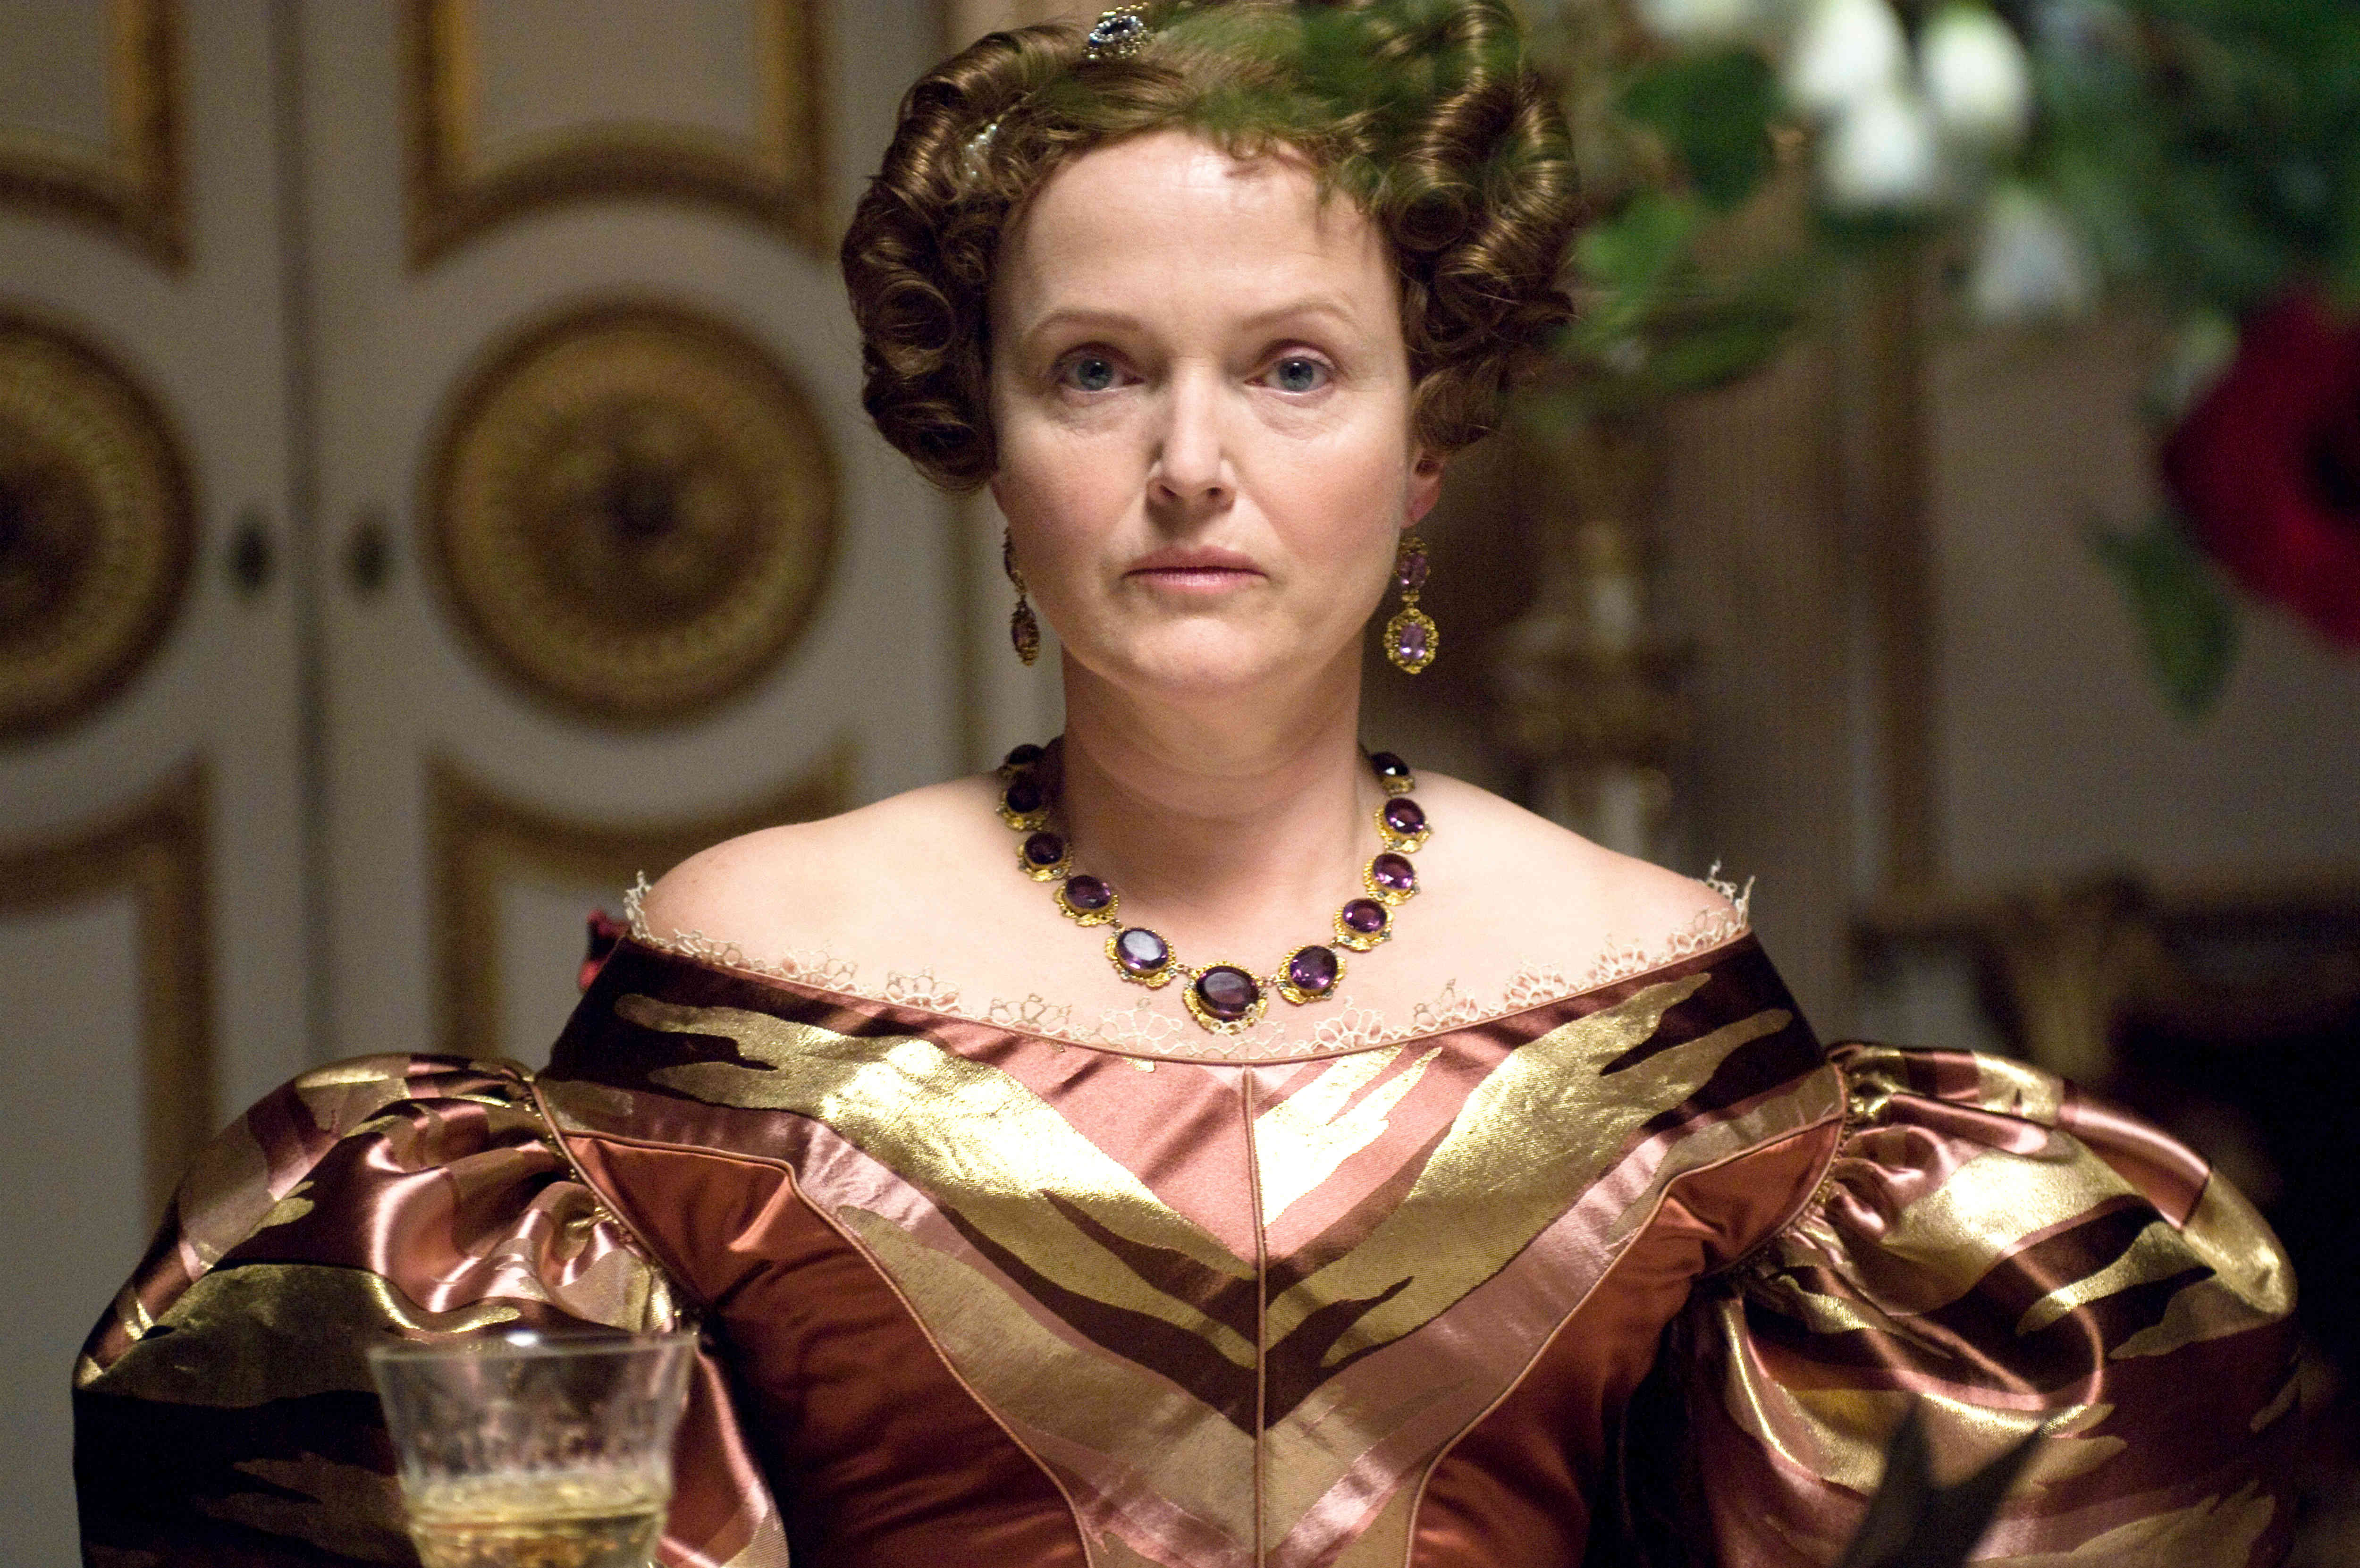 Miranda Richardson stars as Duchess of Kent in Apparition's The Young Victoria (2009)